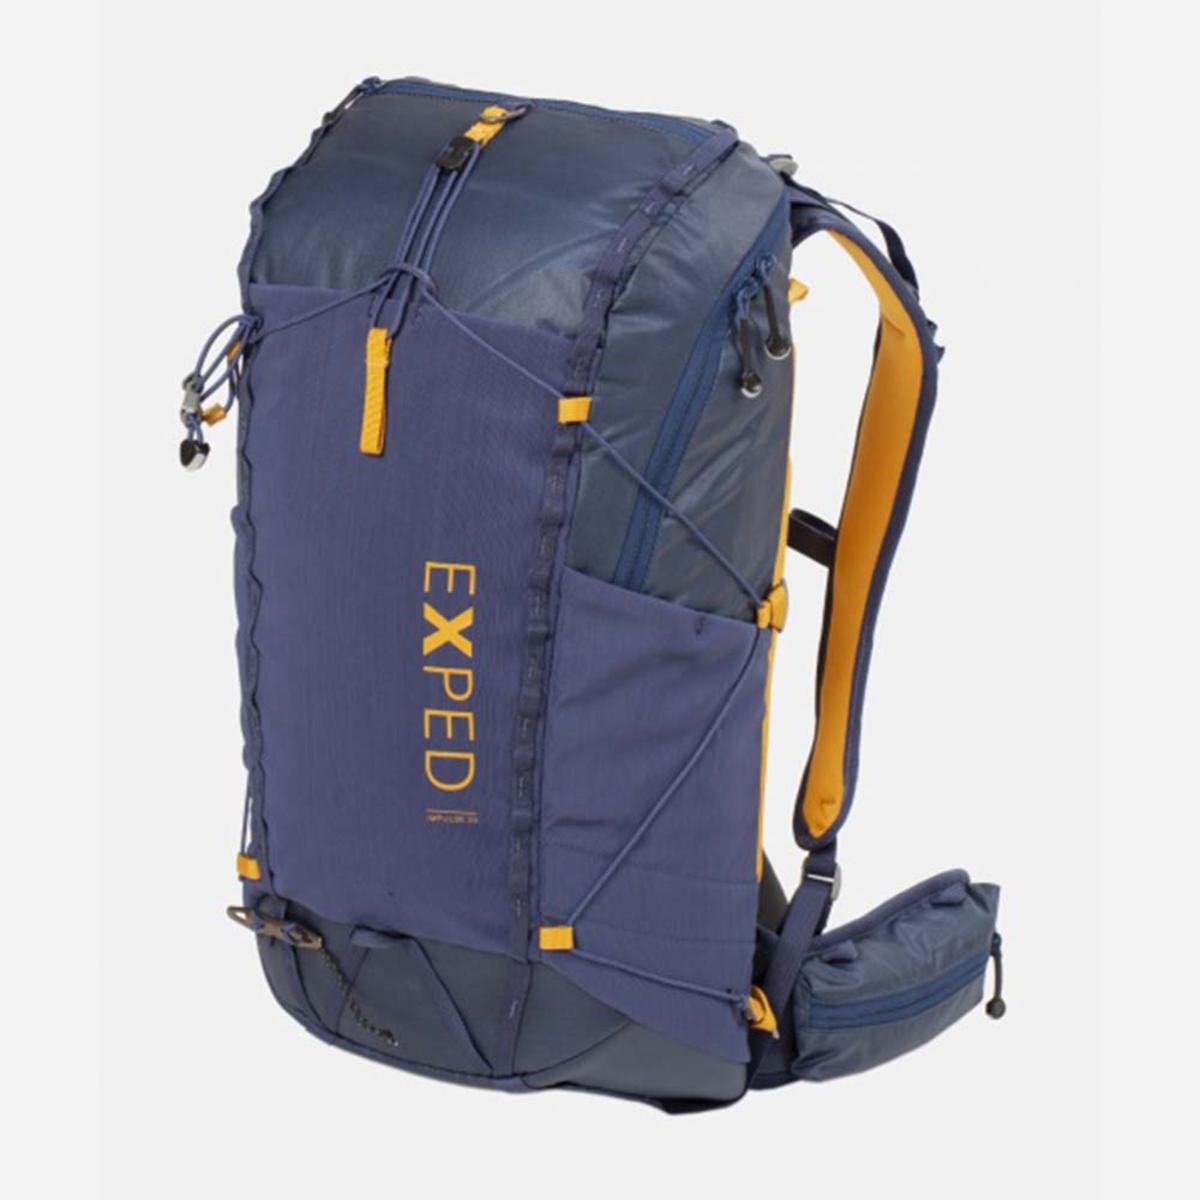 Exped Impulse 20L Hiking Backpack